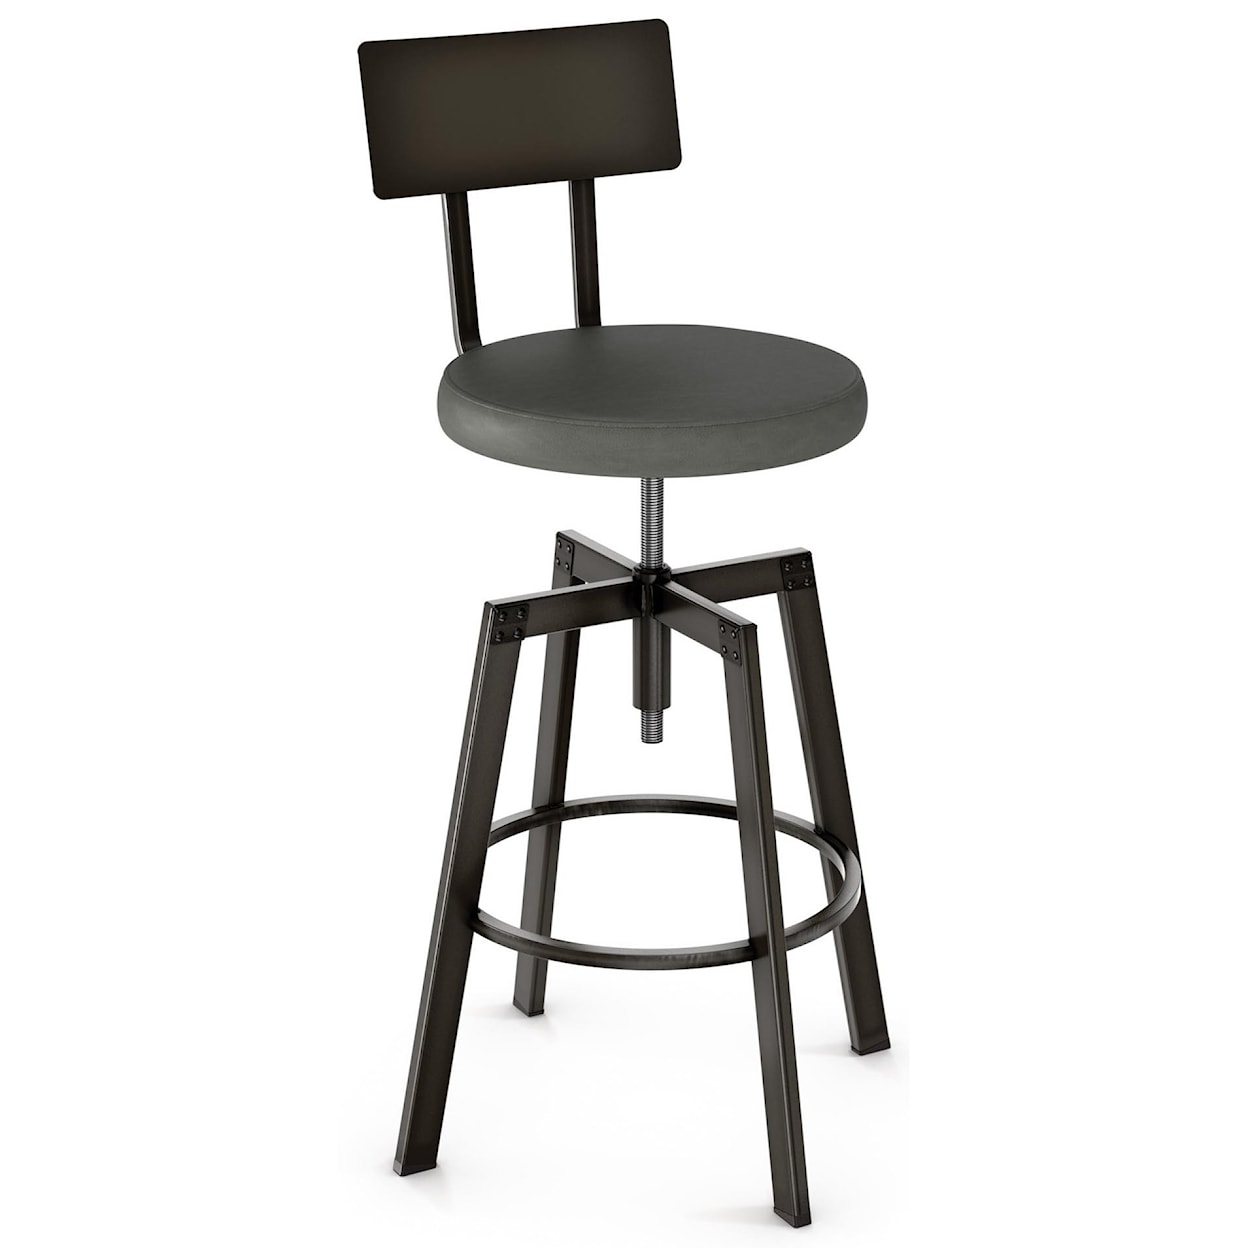 Amisco Industrial Architect Screw Stool with Cushion Seat